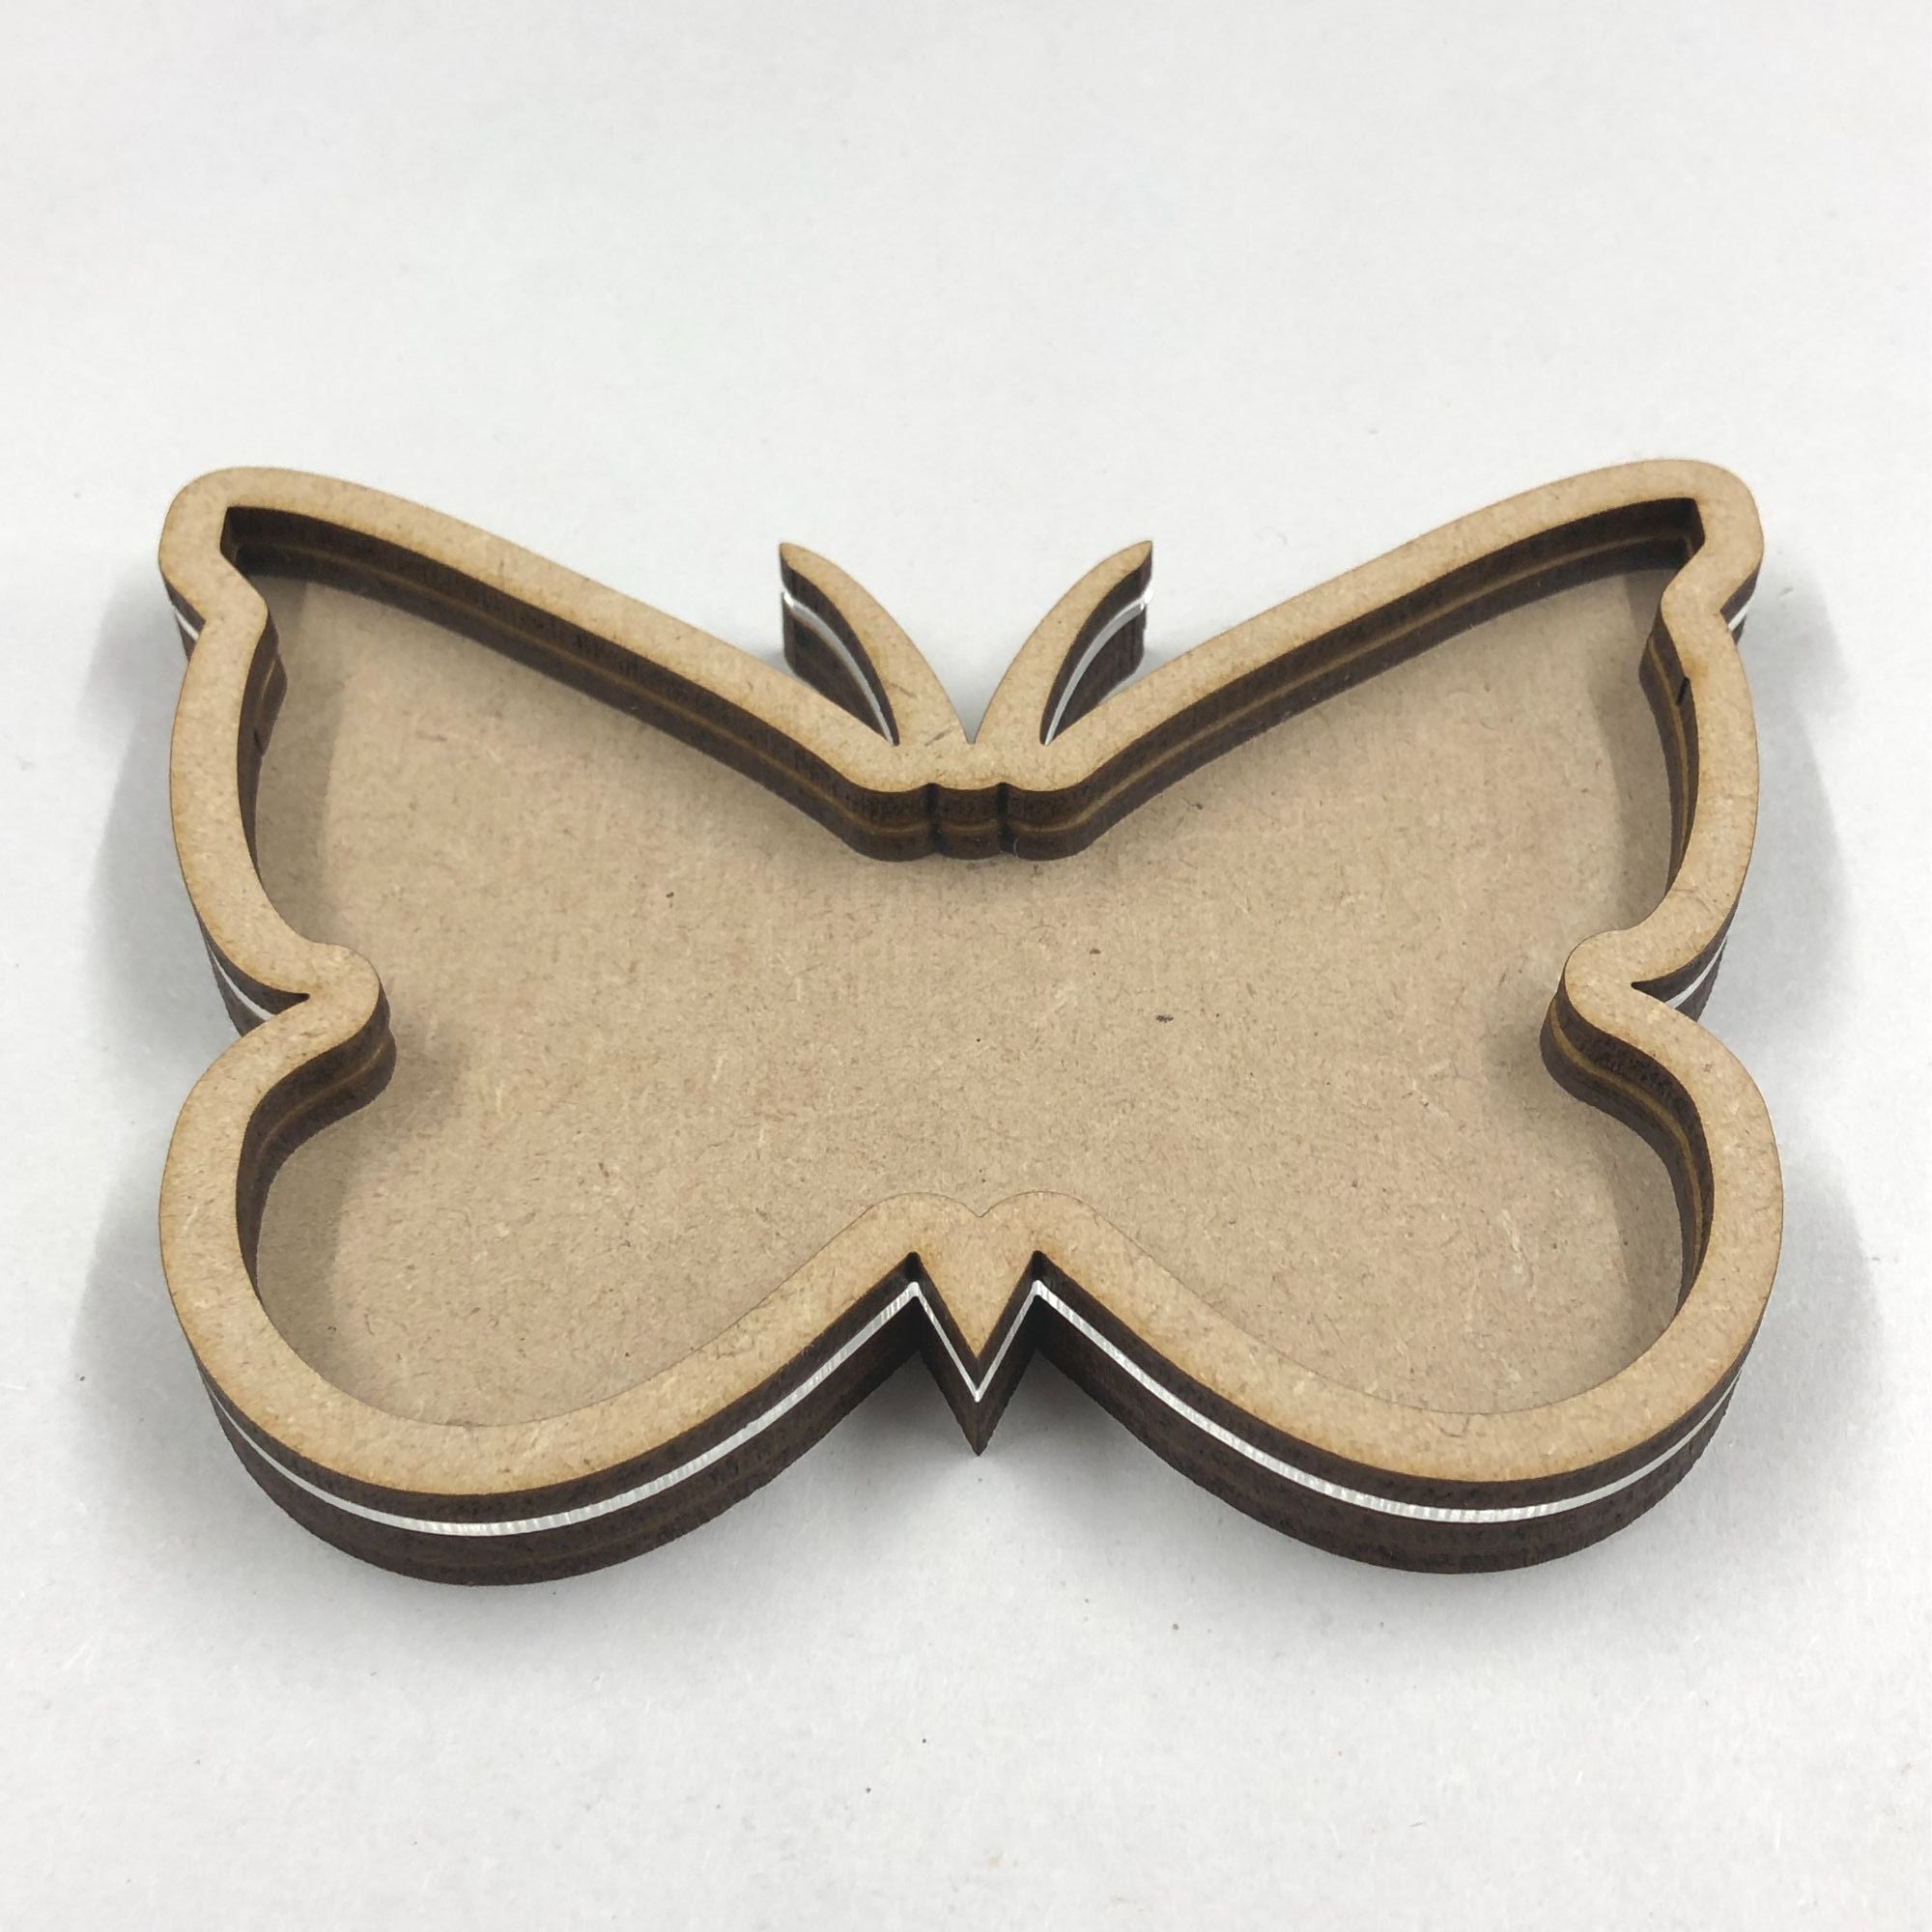 Base MDF - Butterfly Shaker (with Acrylic)